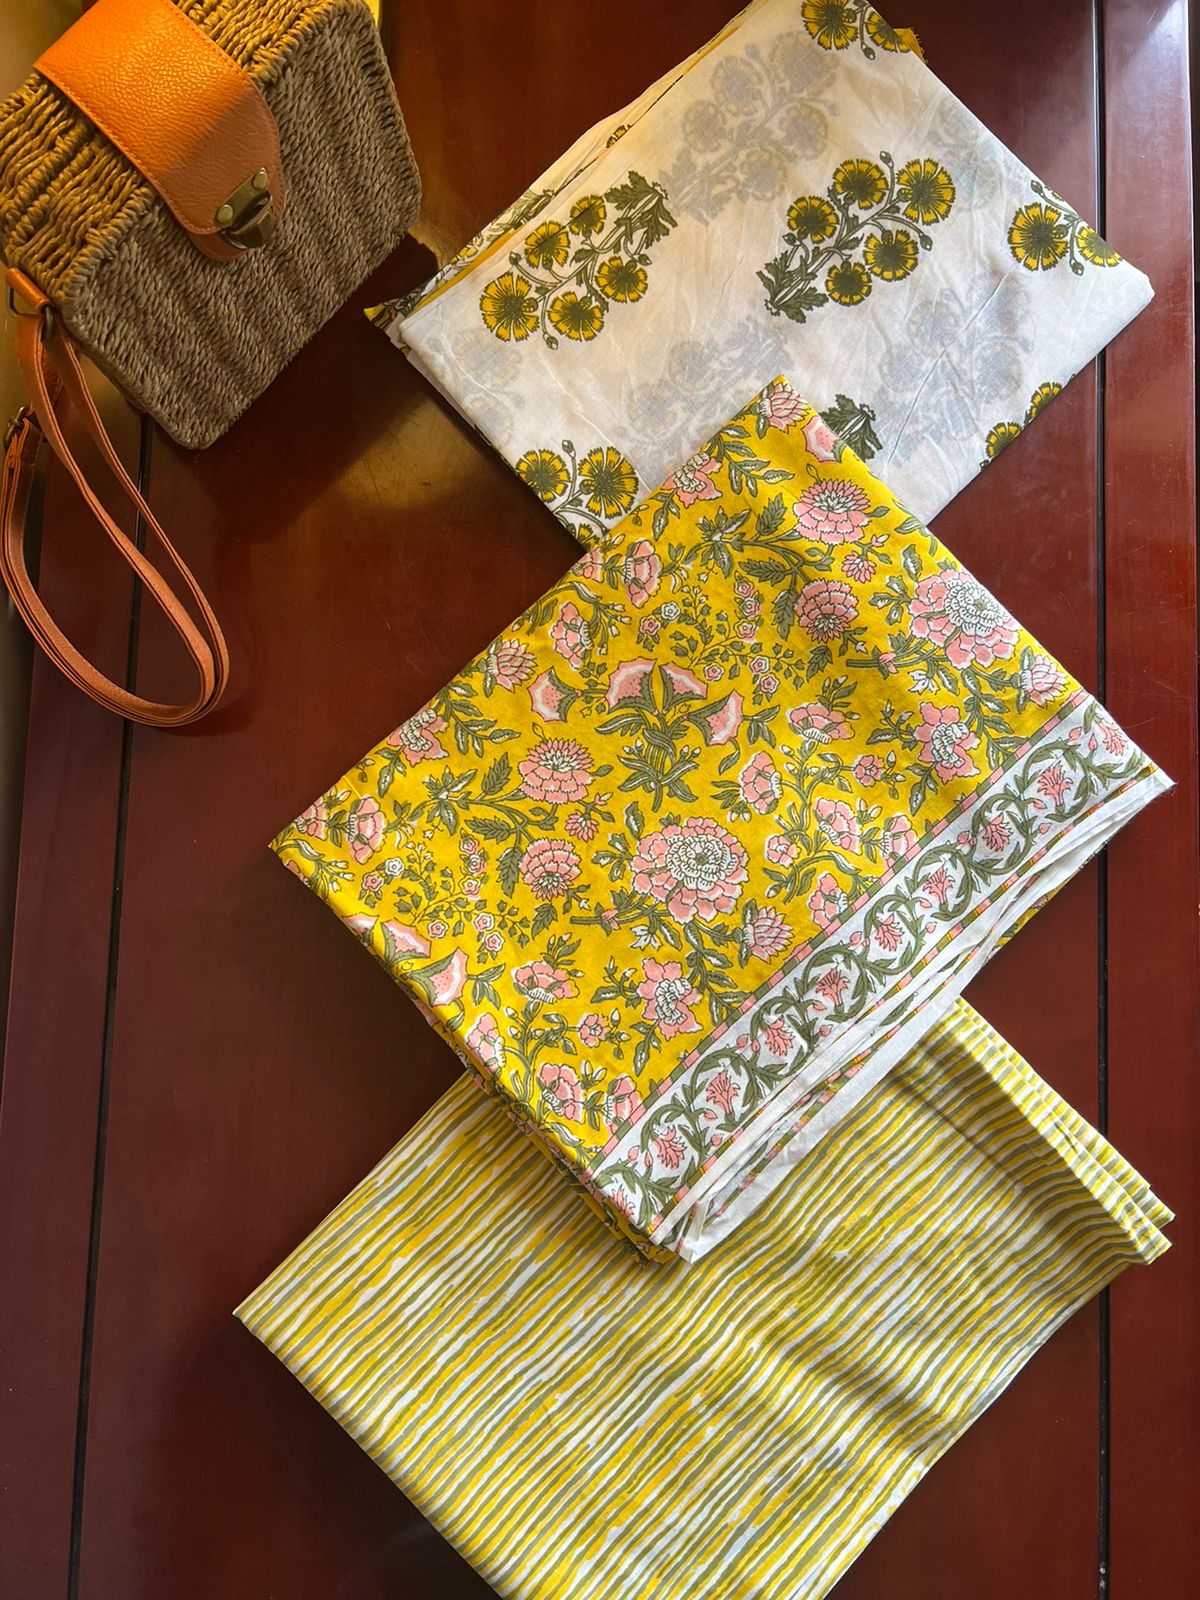 Southloom Hand Block Printed Soft Cotton Jaipur Salwar Suit Material in Yellow Base Colour